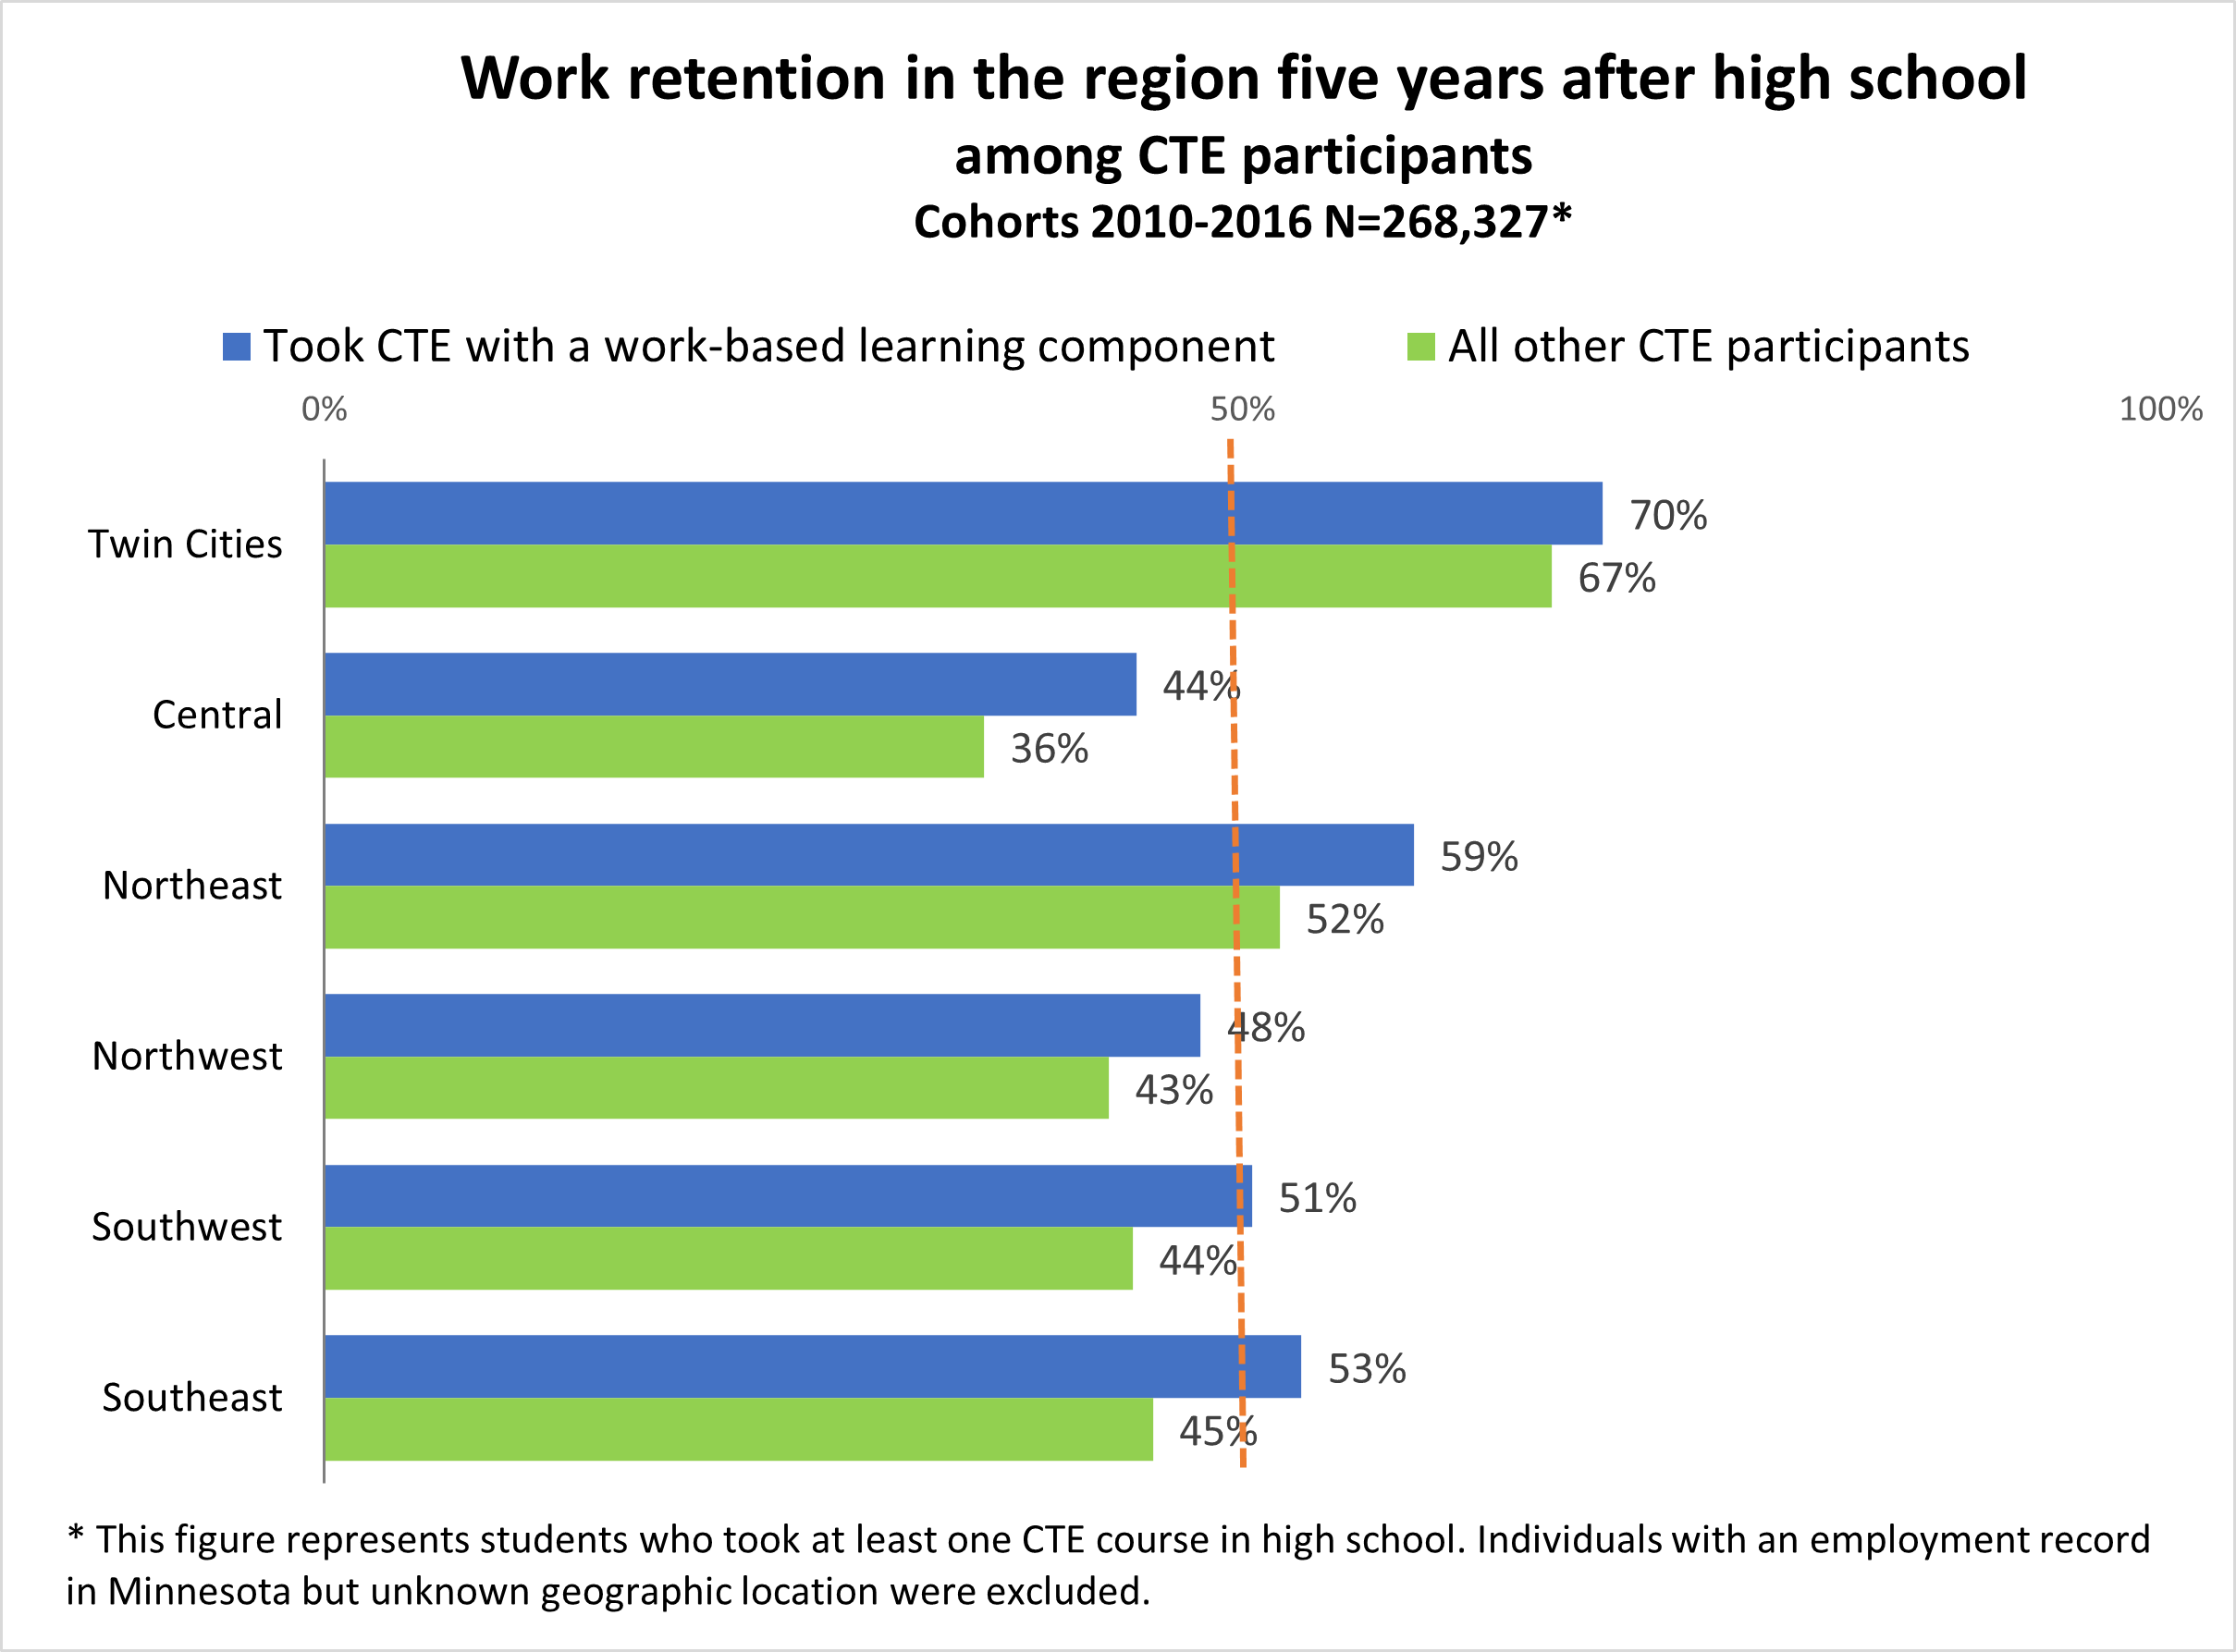 work retention in the region among CTE participants five years after high school